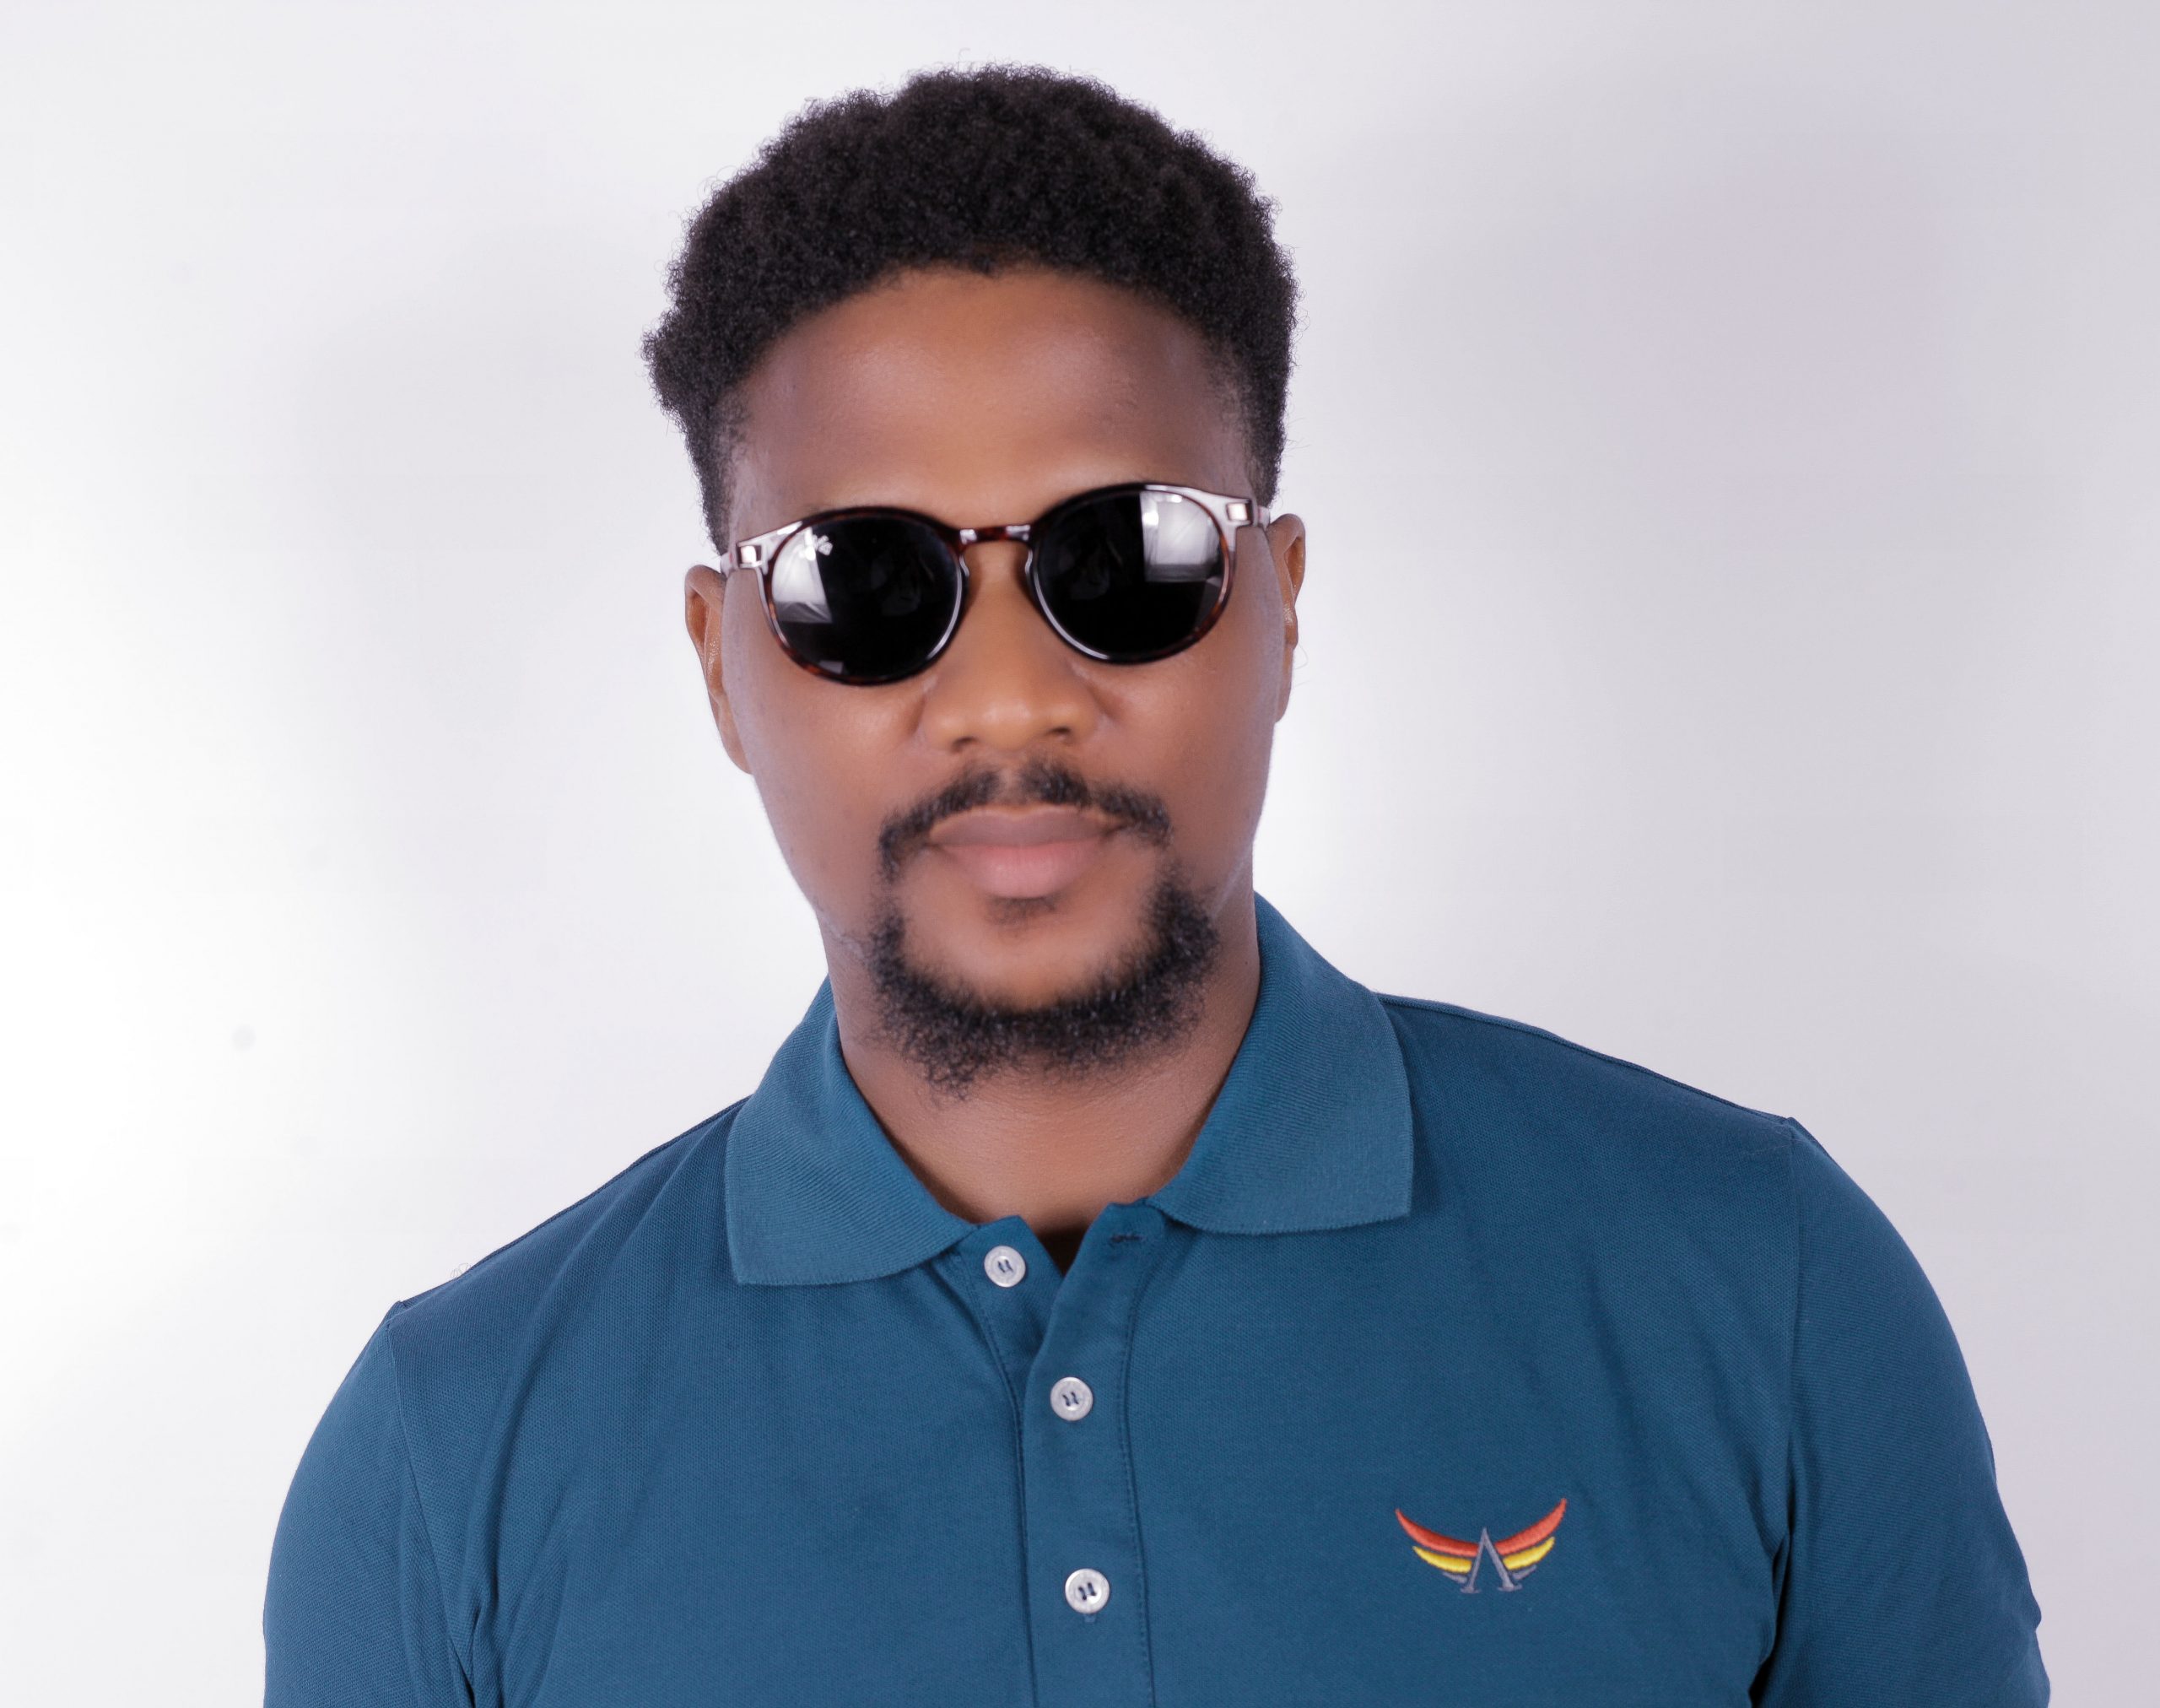 Nigerian artist, Keybone releases a new dance hit song titled “Time to Dance”